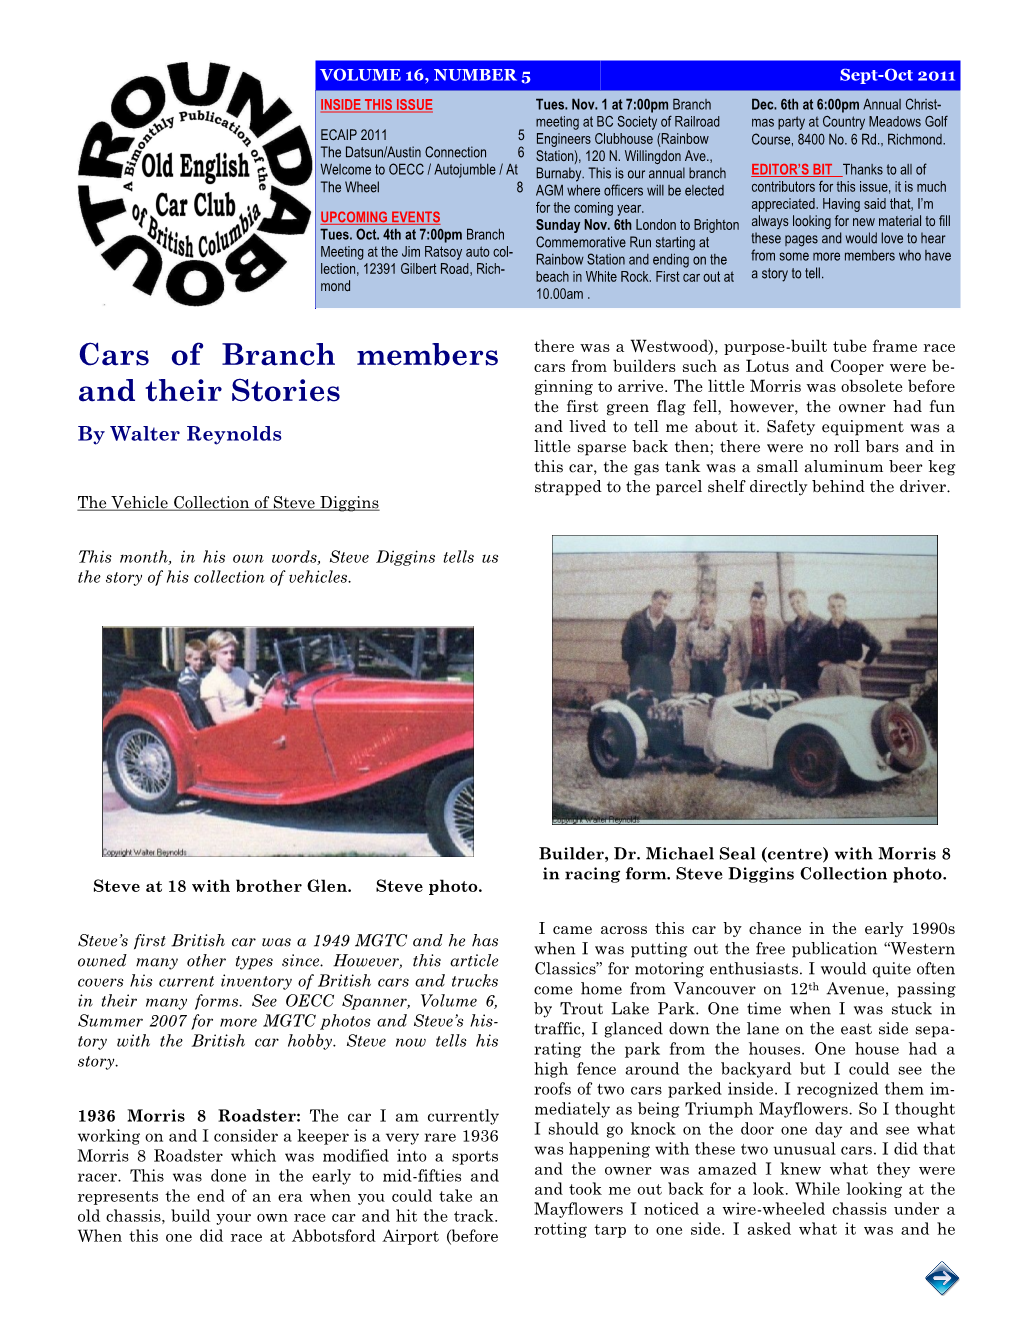 Cars of Branch Members and Their Stories